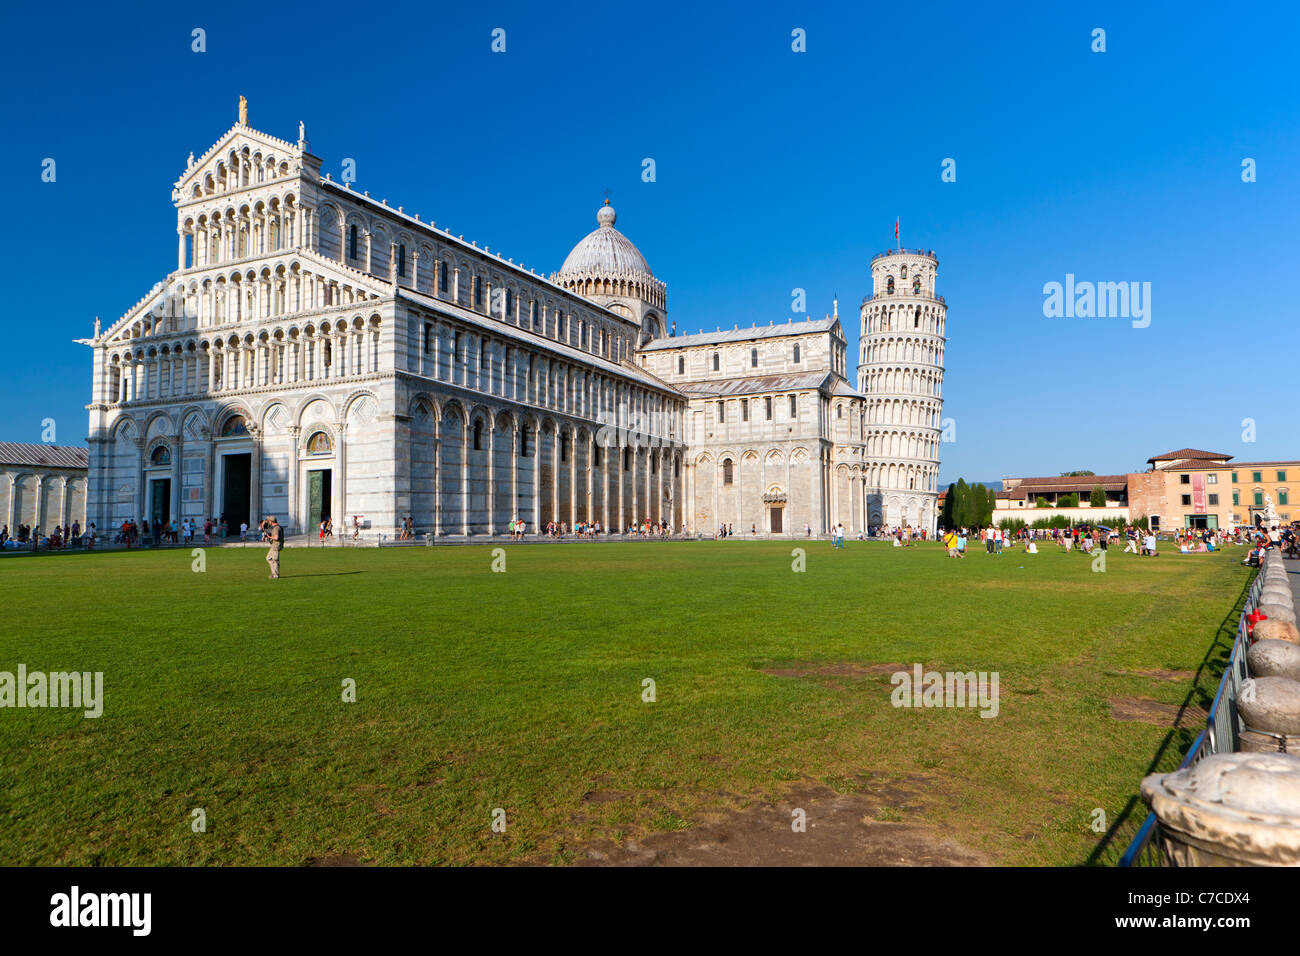 Cathedral and The Leaning Tower of Pisa (Torre pendente di Pisa), Pisa, Toscana, Italy, Europe  Stock Photo